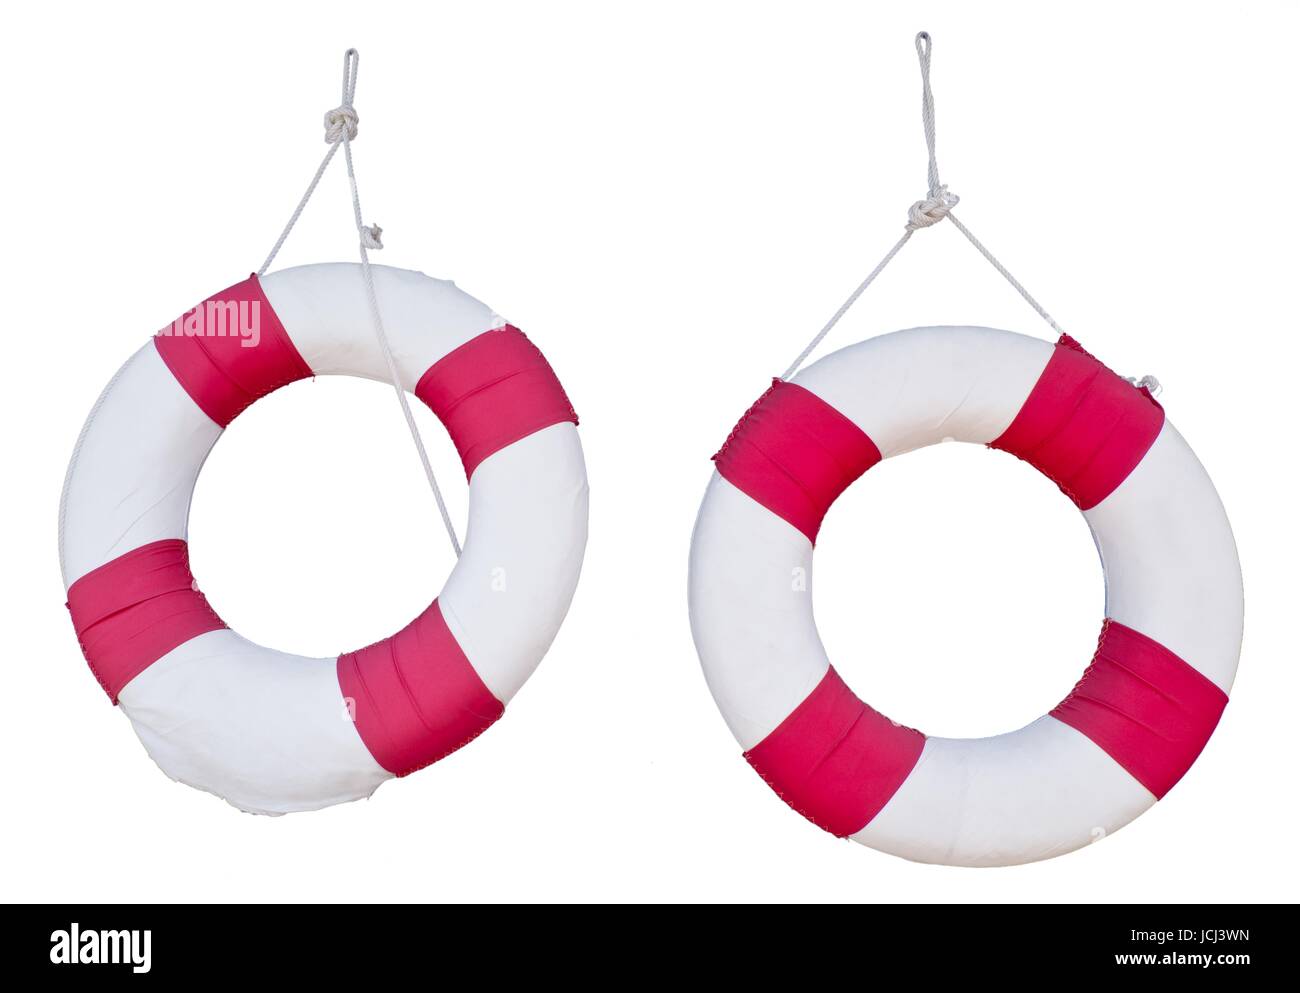 Two Red Life Buoy for Swimming Pool Isolated on White Background. Stock Photo